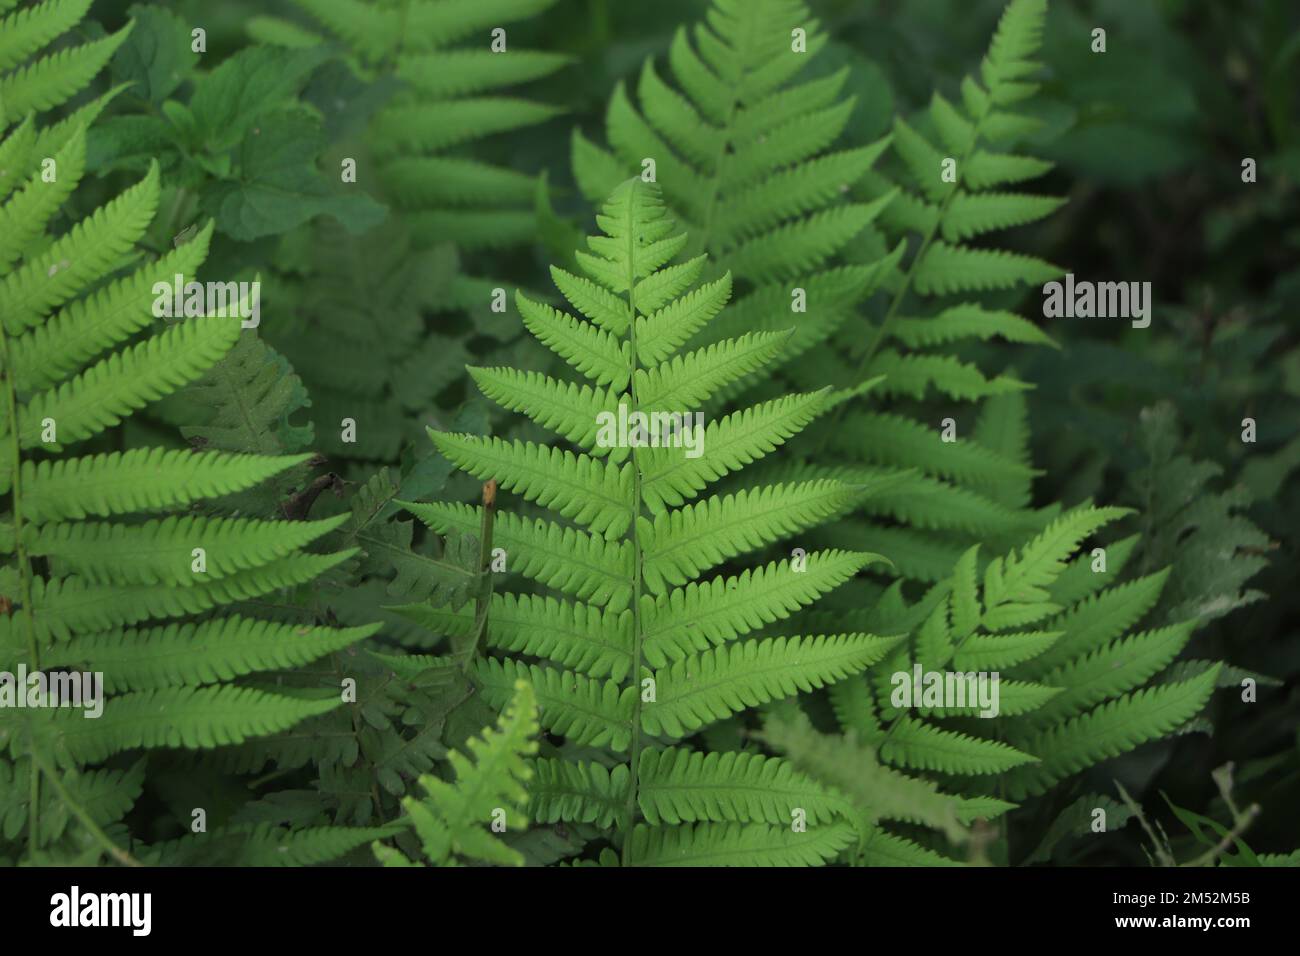 Variety of green fern leaves Stock Photo